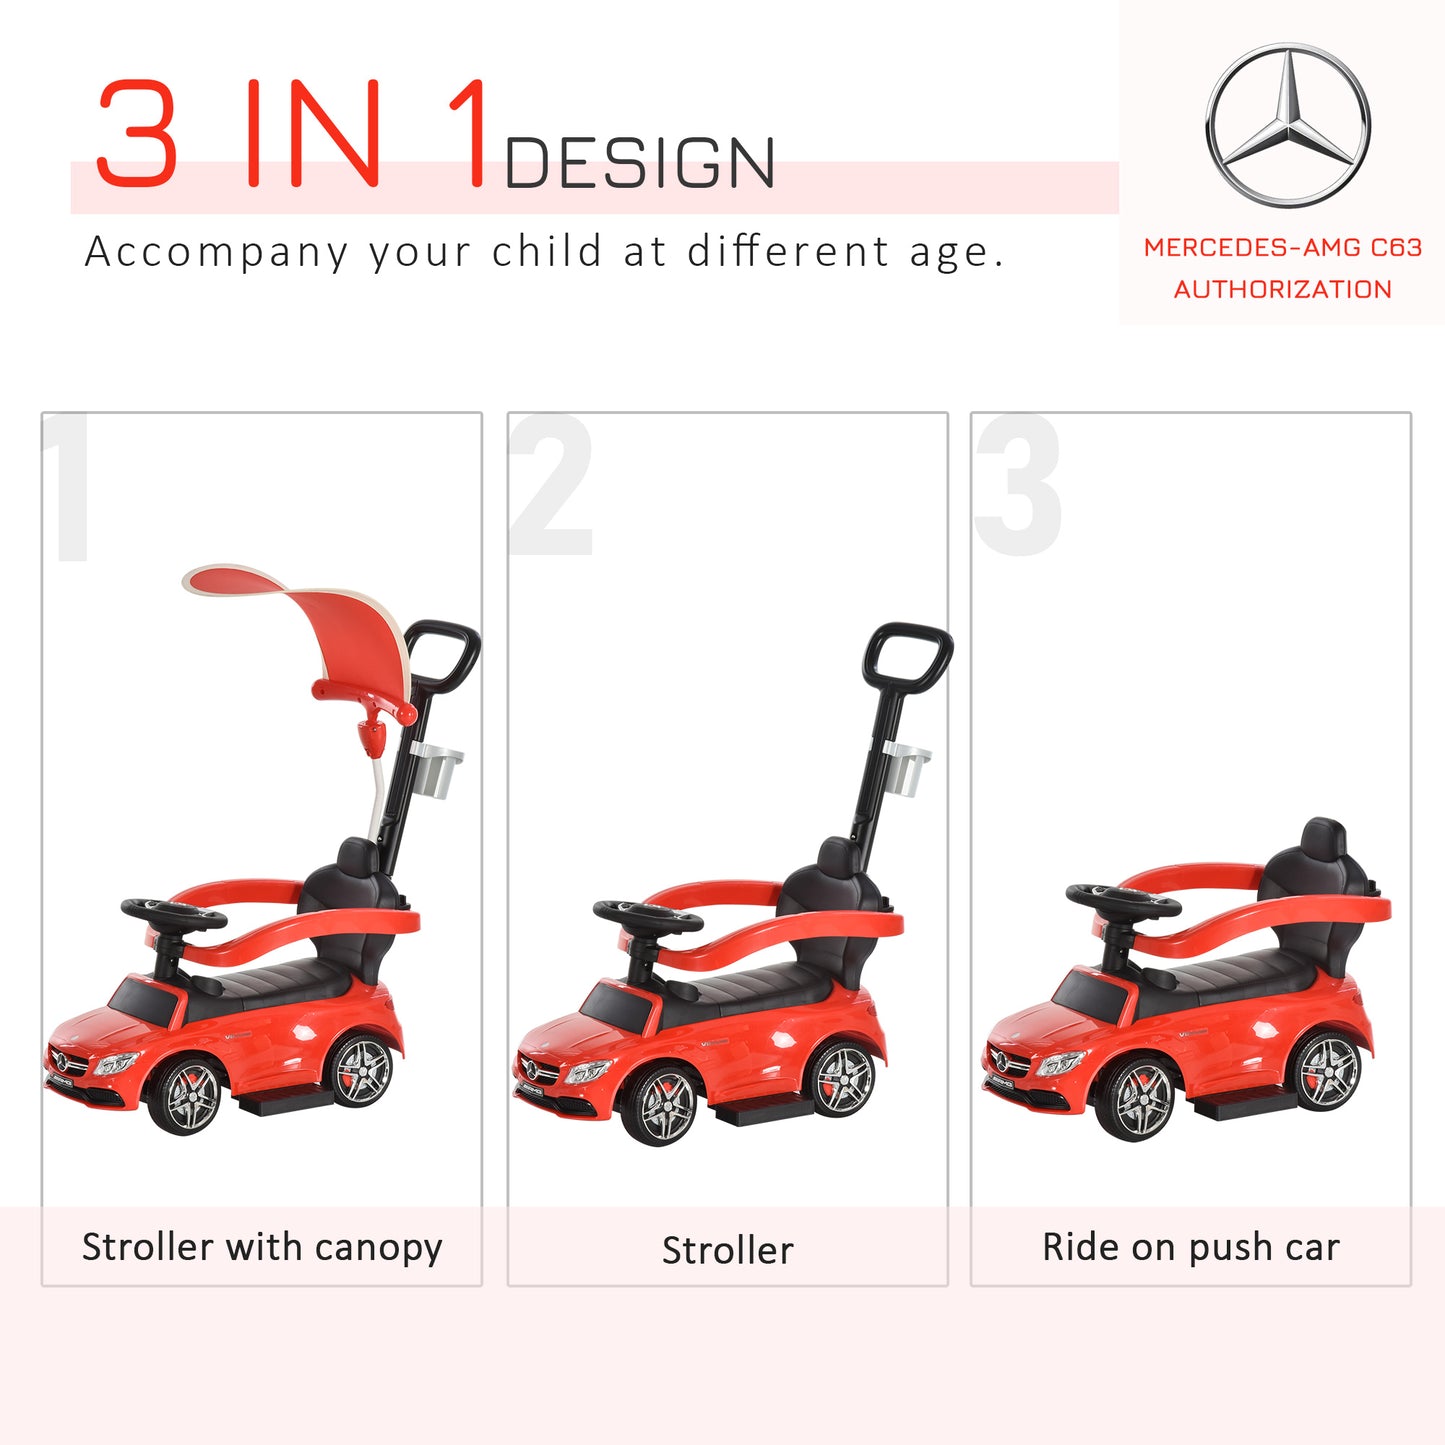 HOMCOM 3 in 1 Ride on Push Along Car Mercedes Benz for Toddlers Stroller Sliding Walking Car with Sun Canopy Horn Sound Safety Bar Cup Holder Ride on Toy for 1-3 Years Old Boy Girl Red